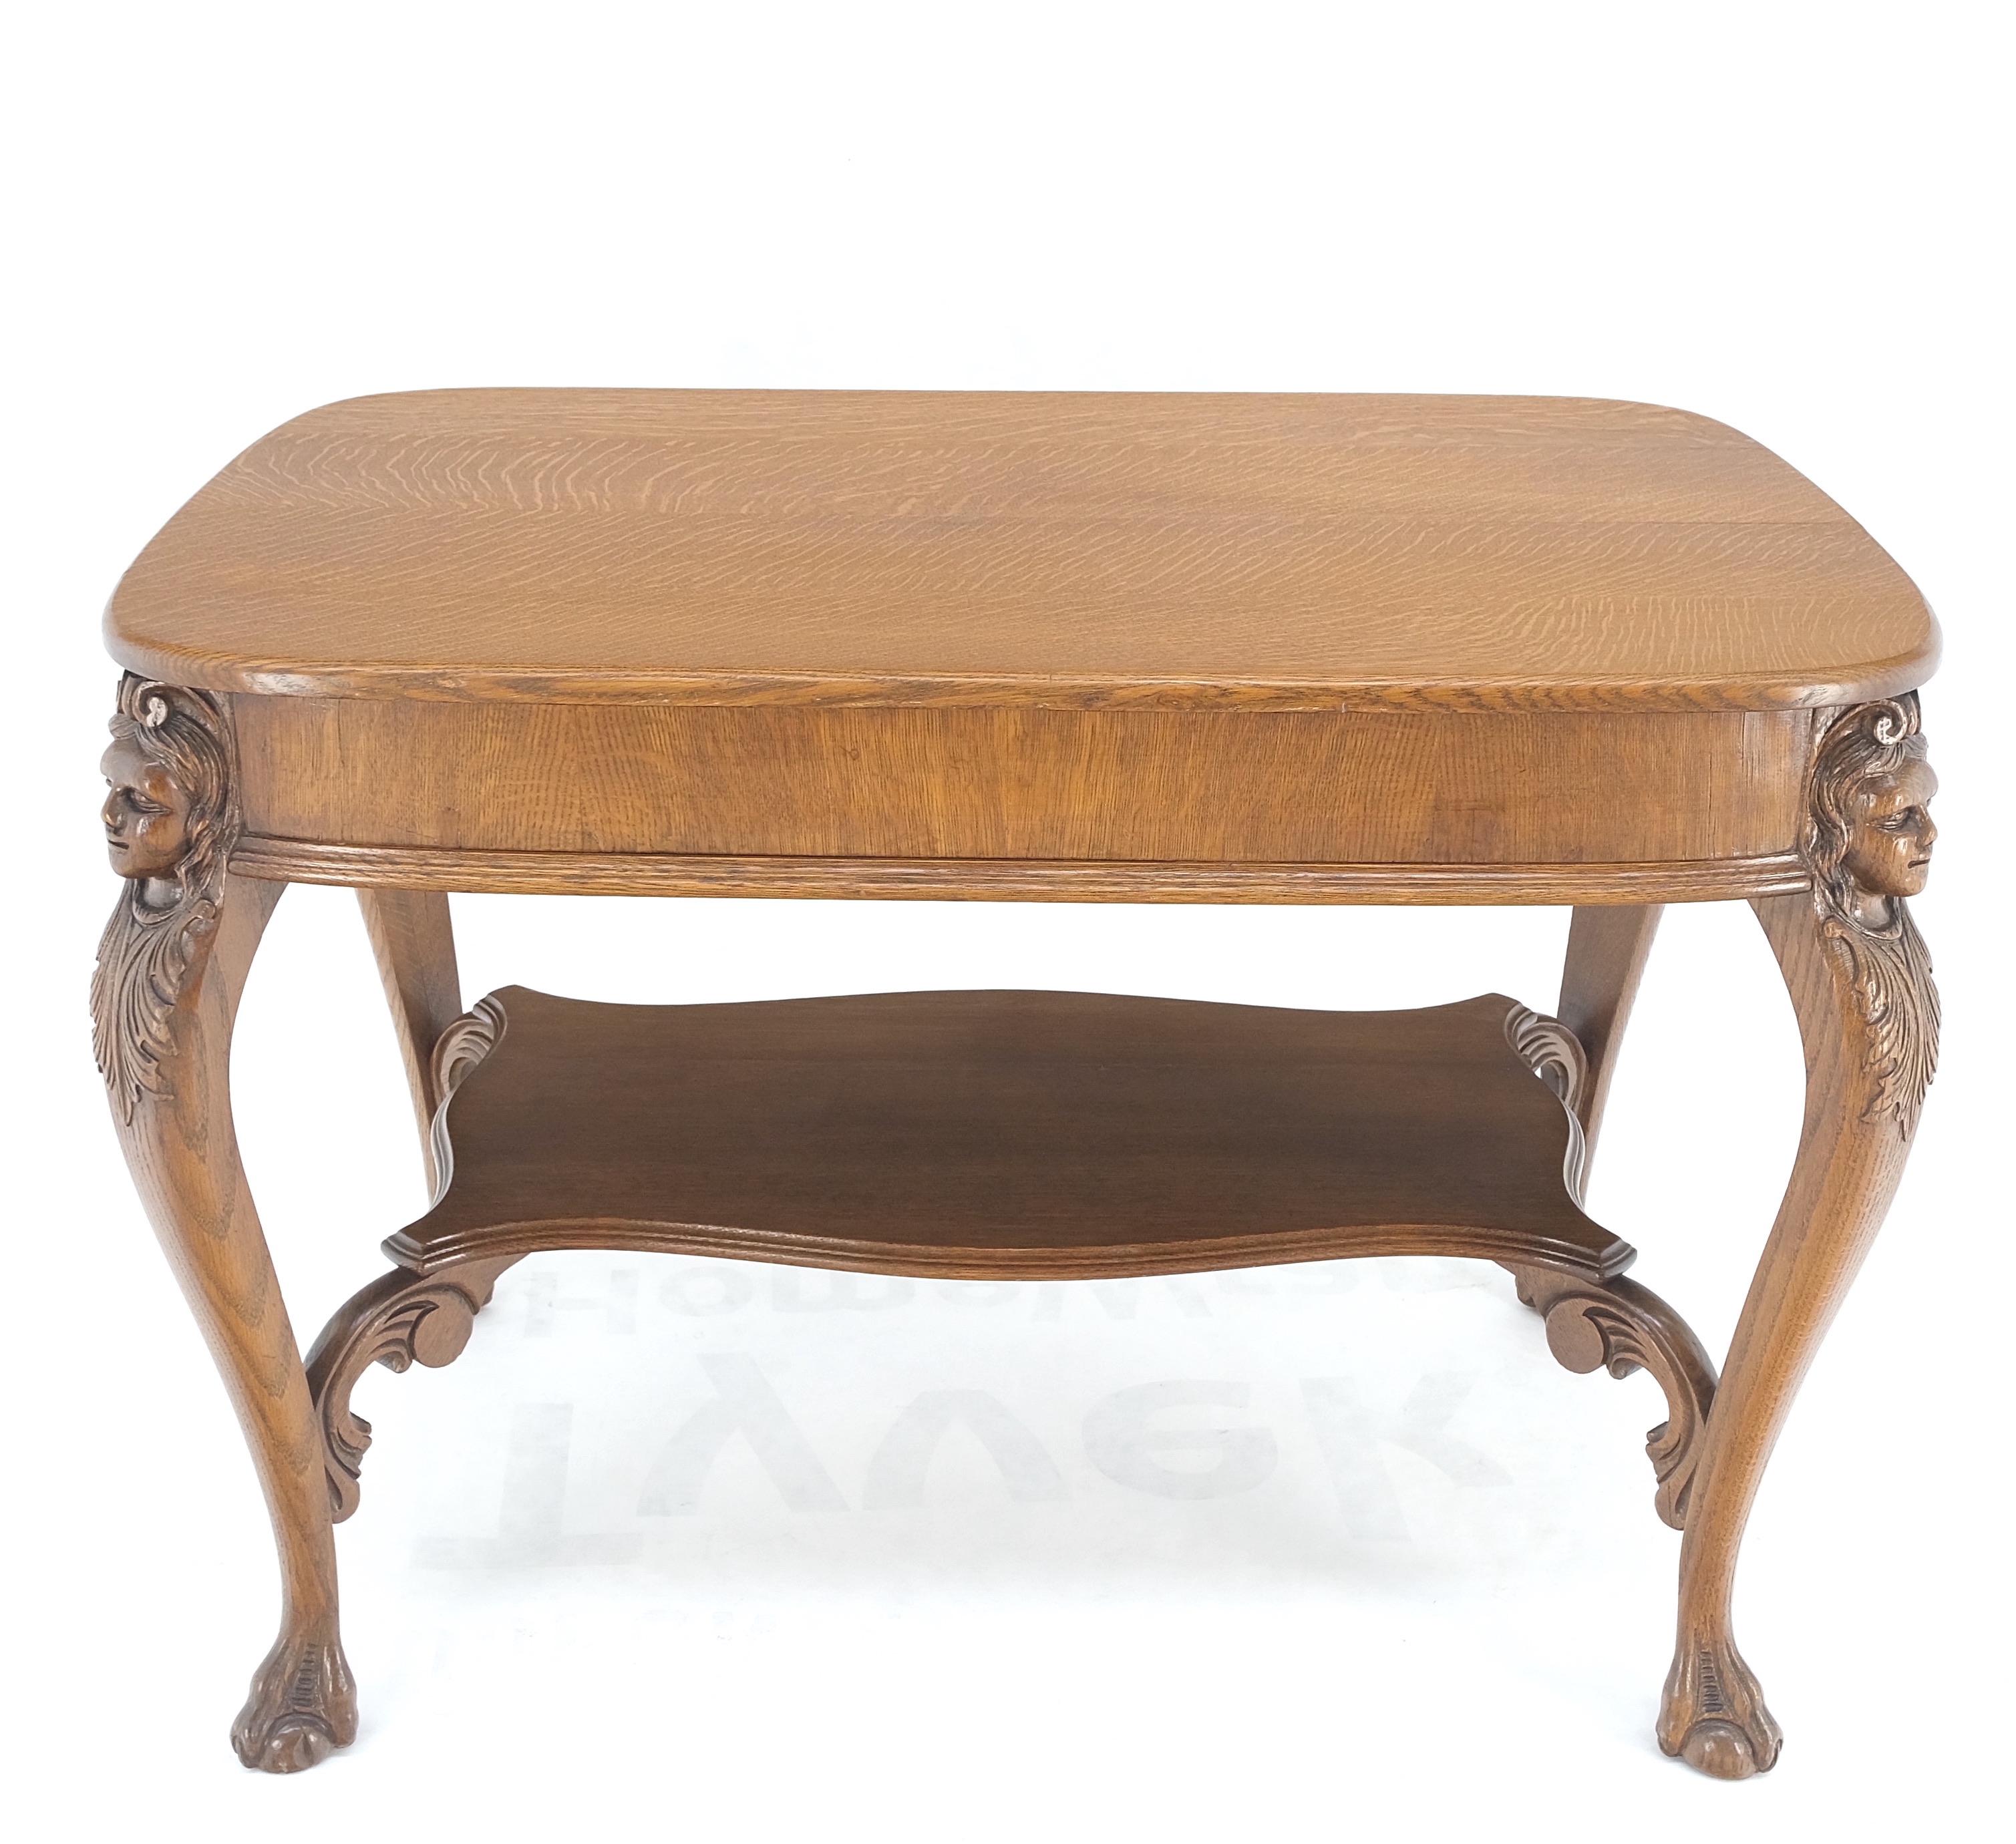 Art Nouveau Style Carved Faces Ball & Claw Feet Rounded Oak Desk Writing Table For Sale 10